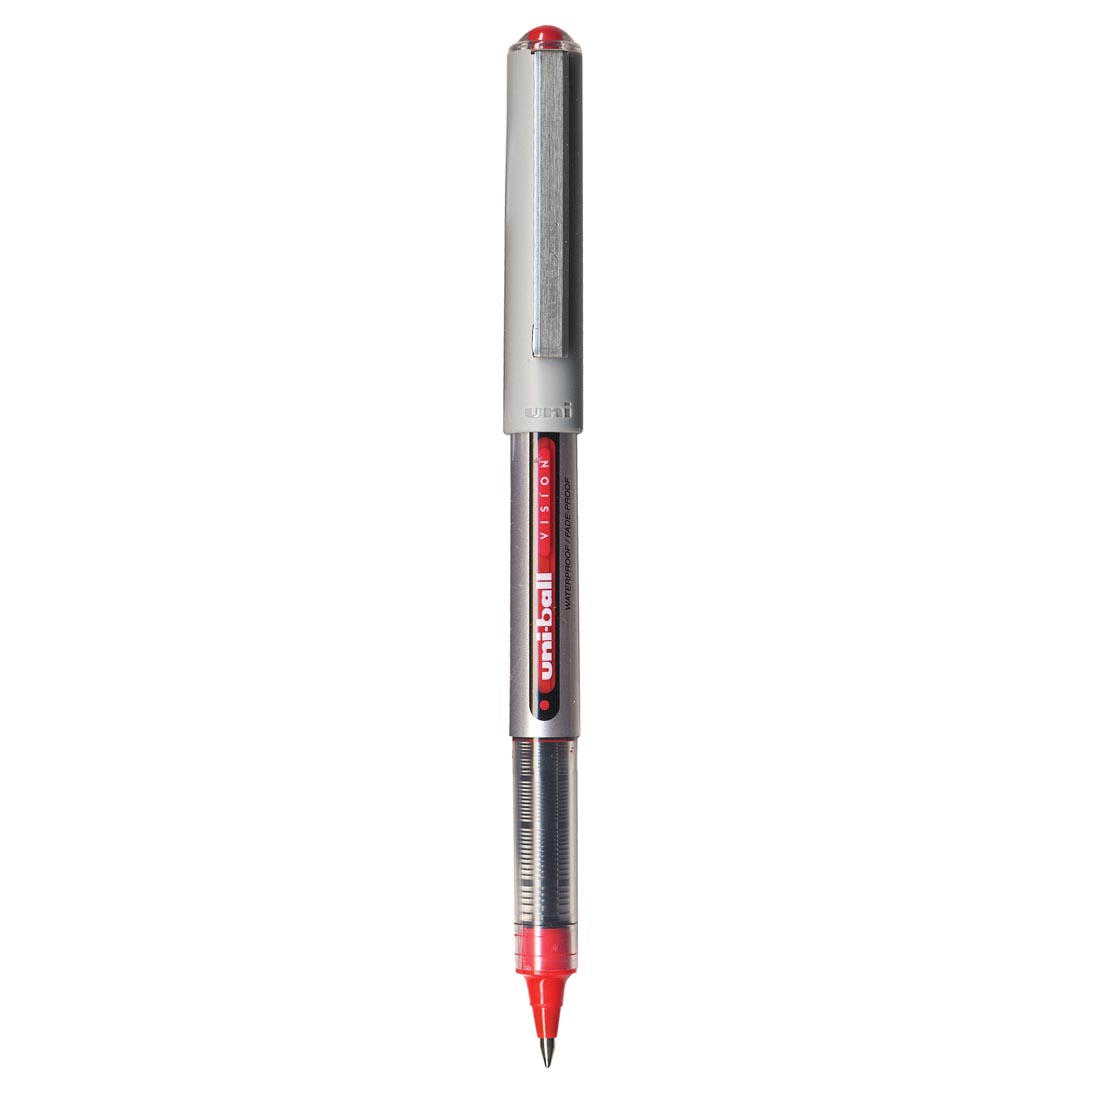 Red Uni-ball Vision Micro Tip Rollerball Pen with cap on opposite end